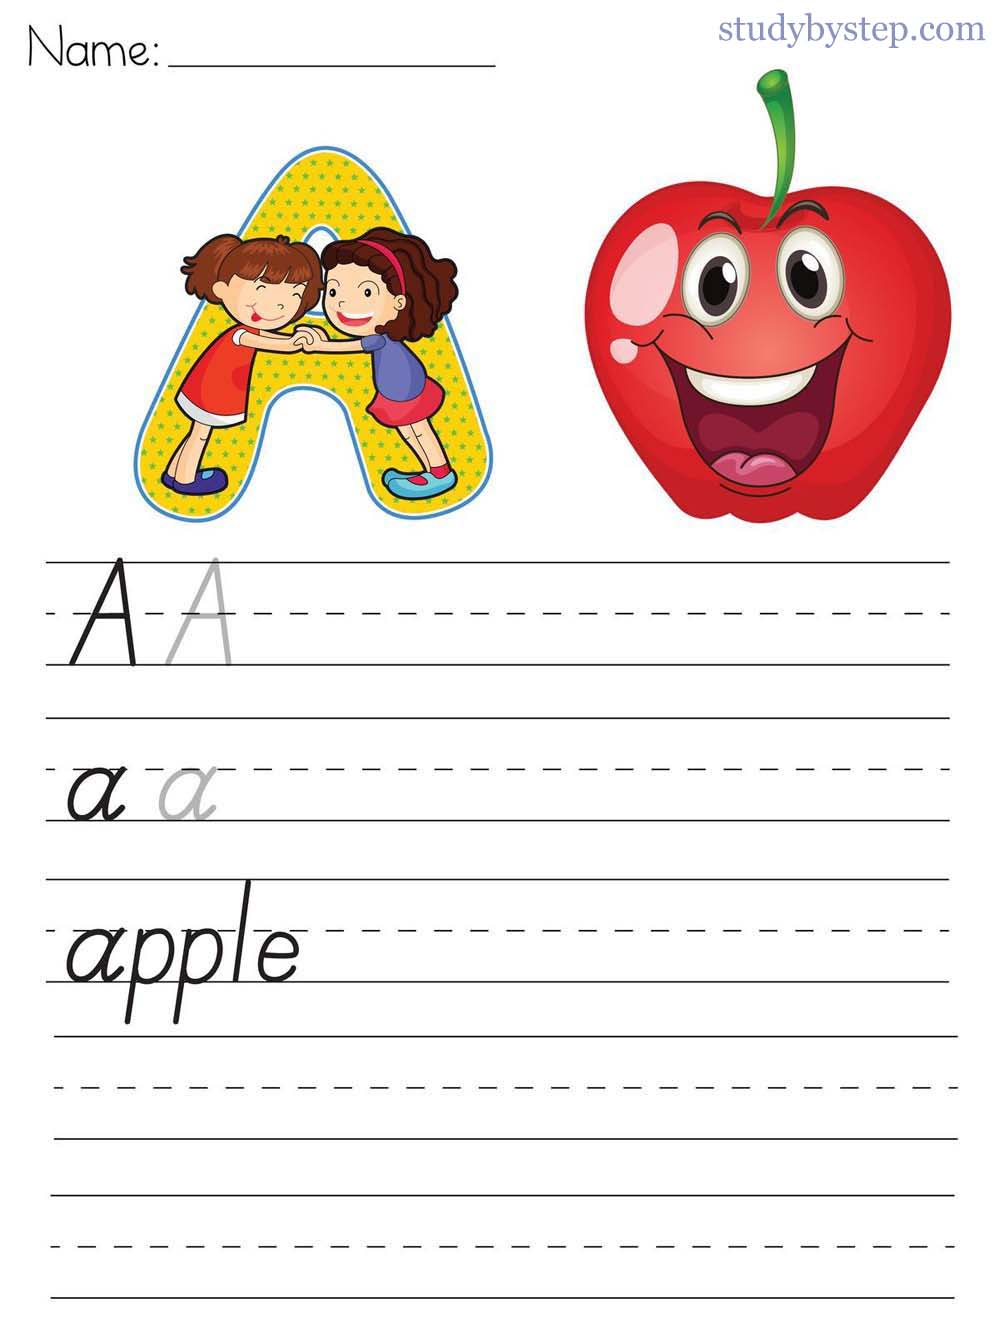 Picture Worksheet 2 - Handwriting Practice of Capital A and Small a